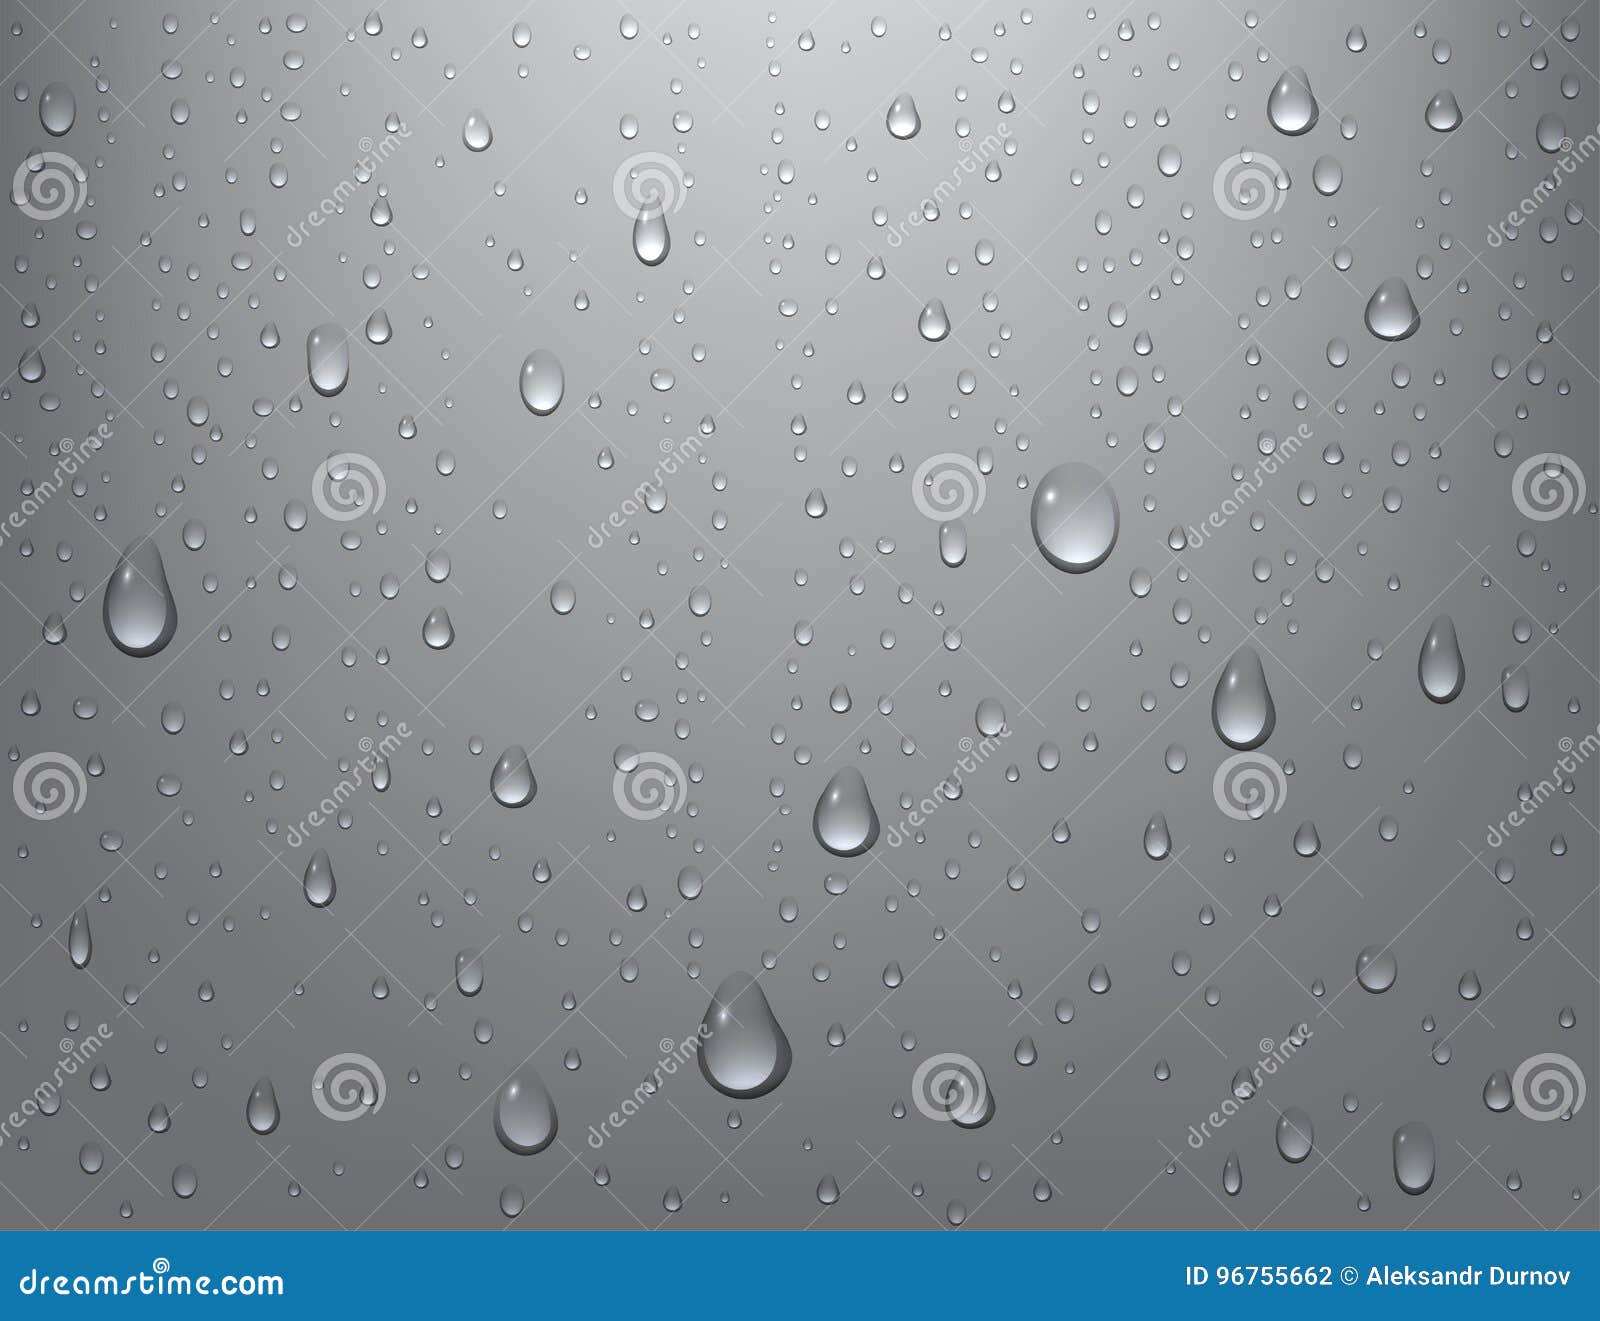 realistic pure water drops on  background. steam shower condensation on vertical surface.  .